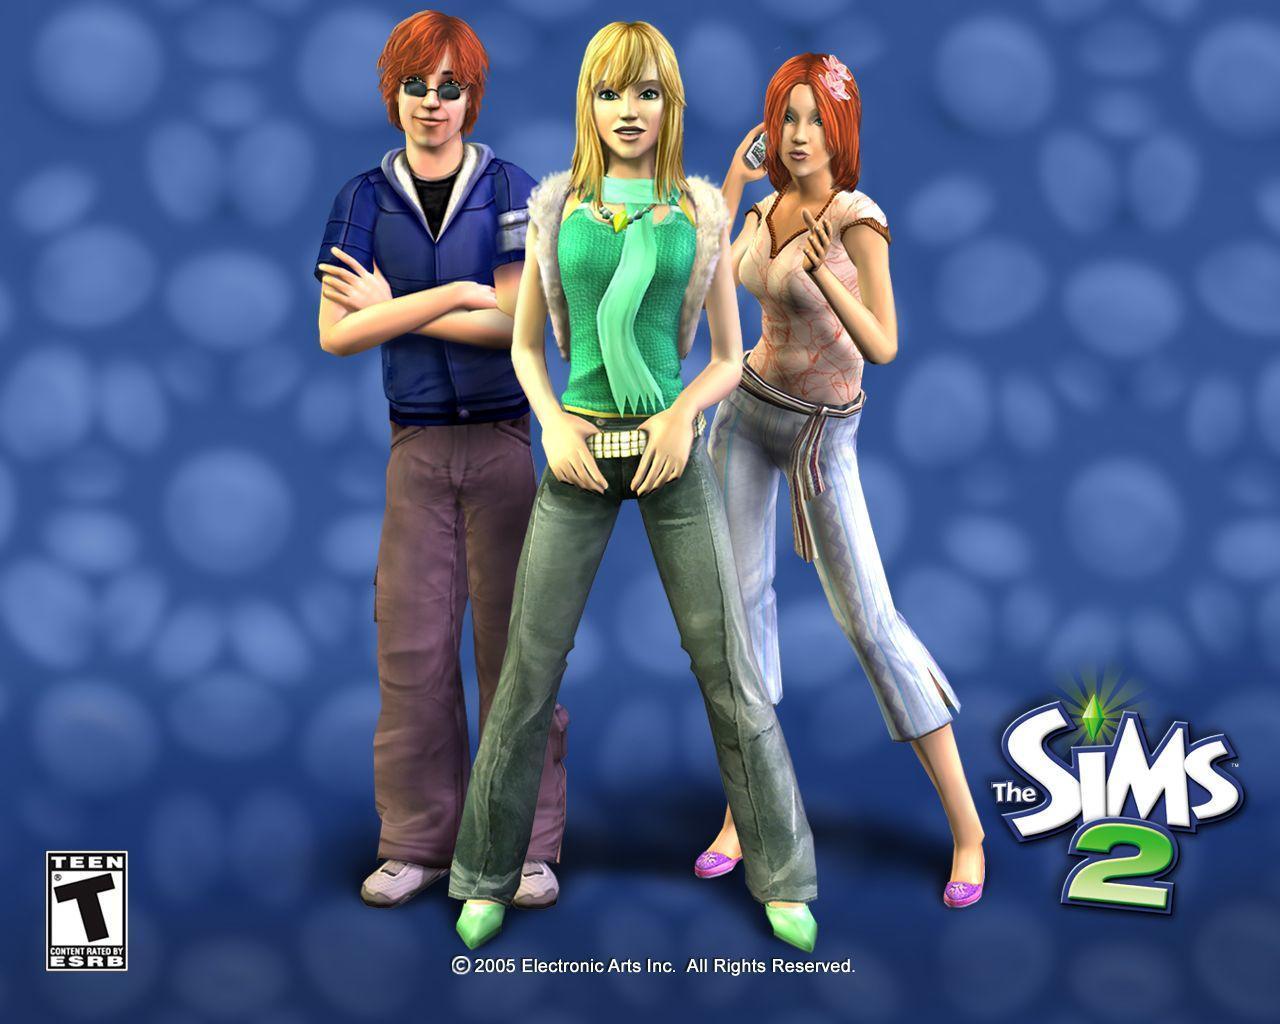 The Sims Hd Cool Wallpapers